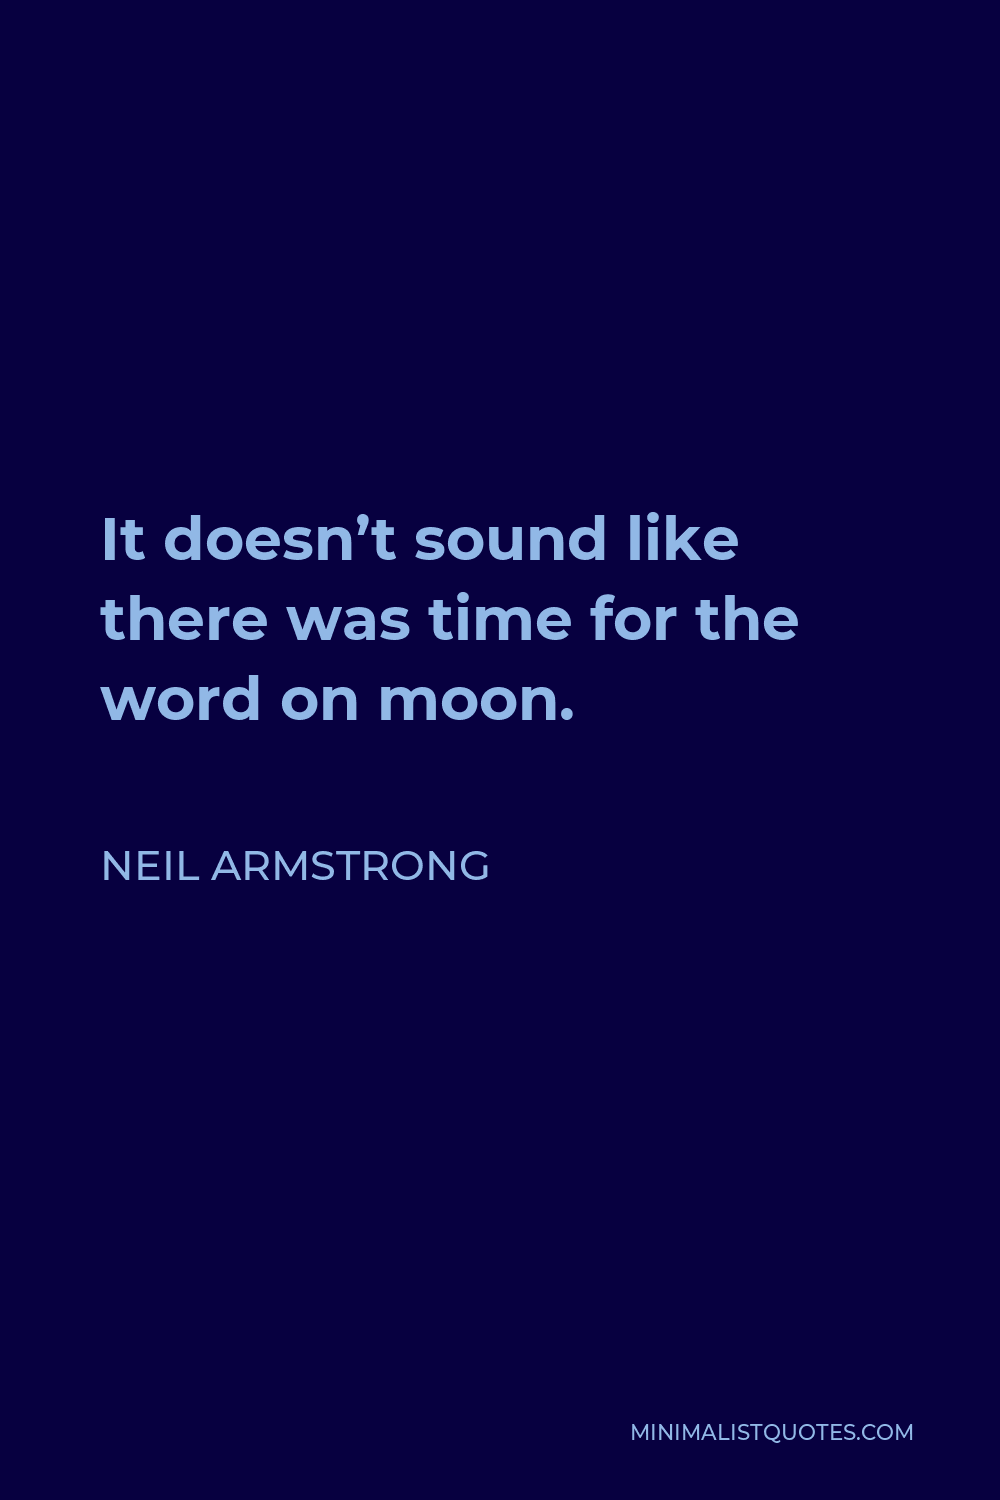 Neil Armstrong Quote - It doesn’t sound like there was time for the word on moon.